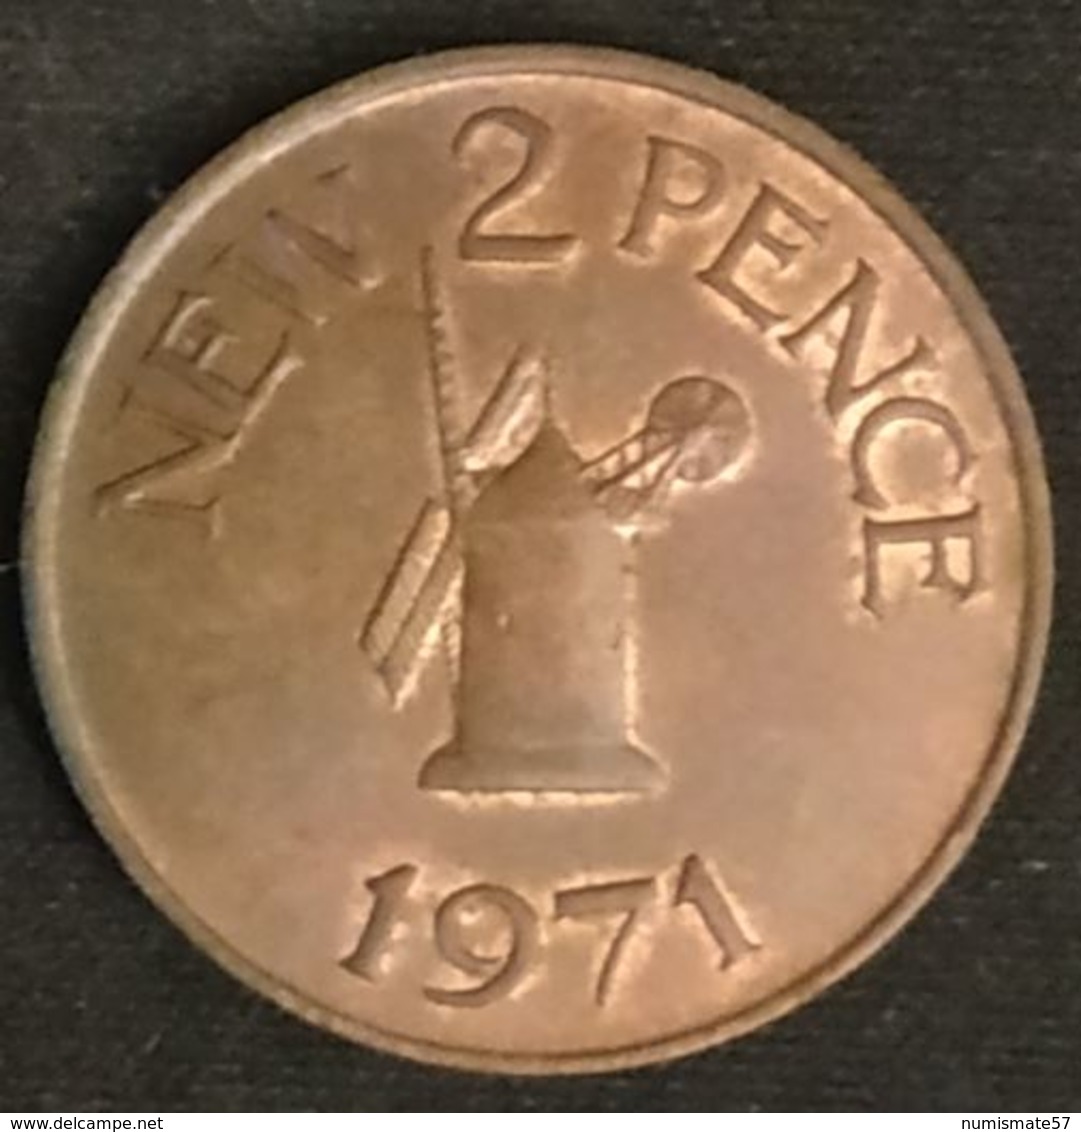 GUERNESEY - 2 PENCE 1971 - Elizabeth II - KM 22 - TWO NEW PENCE - GUERNSEY ( Moulin à Vent ) - Guernesey